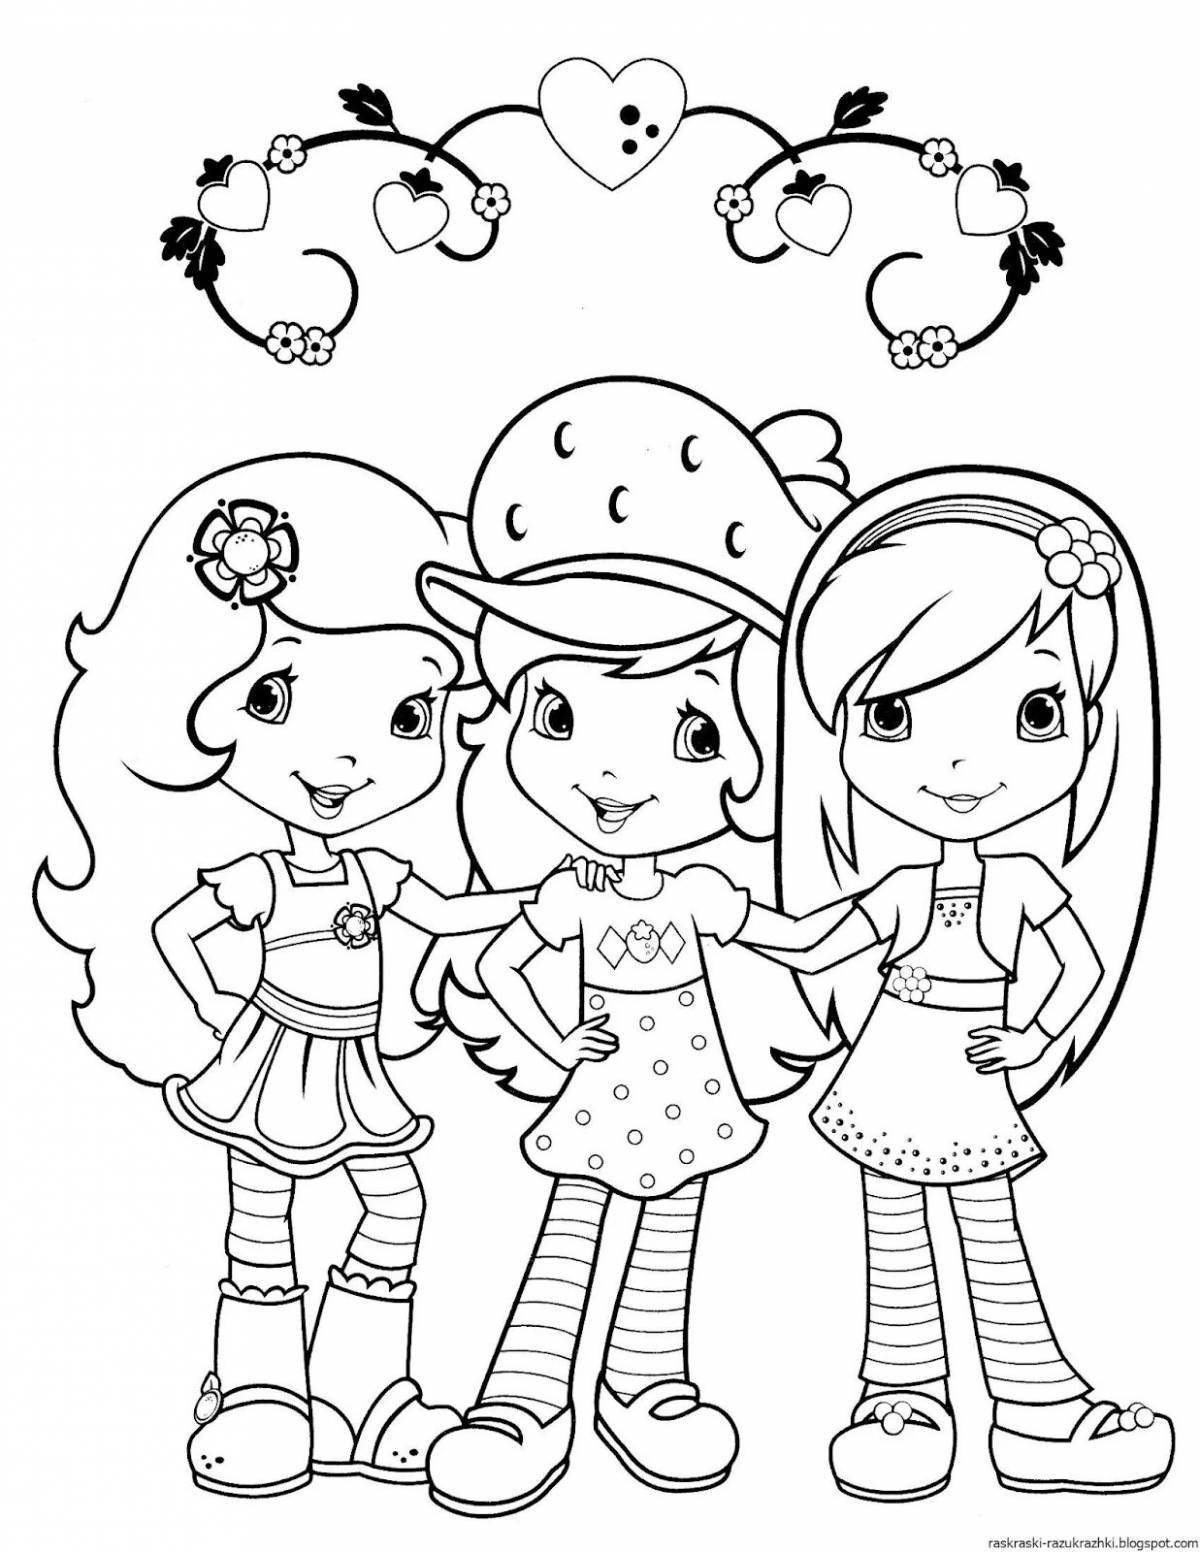 Playful coloring for girls 5-6 years old